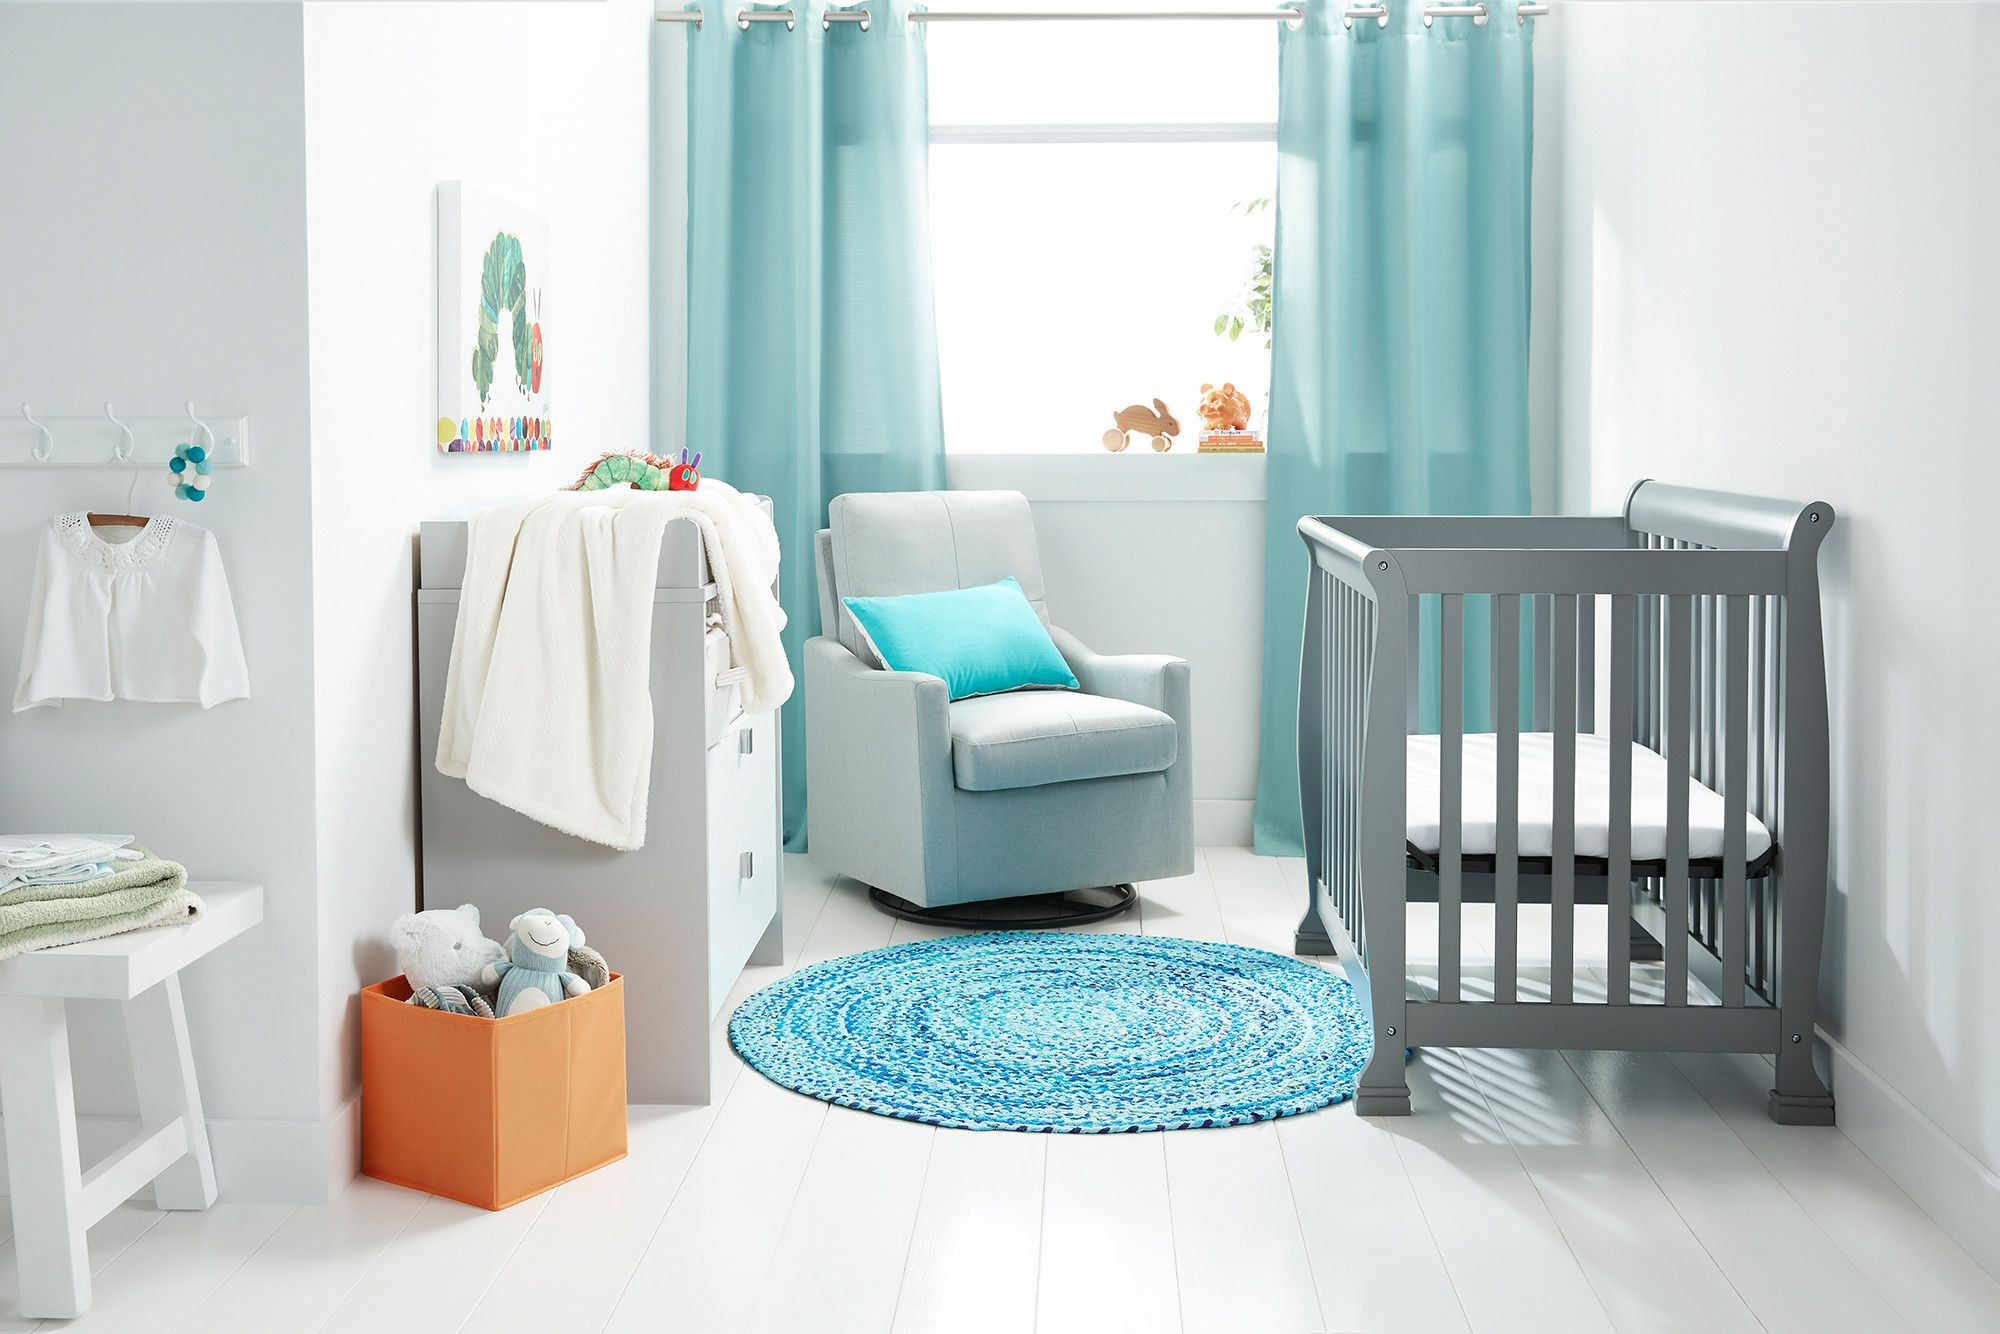 Walmart Baby Room Decor
 The Ultimate Walmart Baby Registry Checklist With images